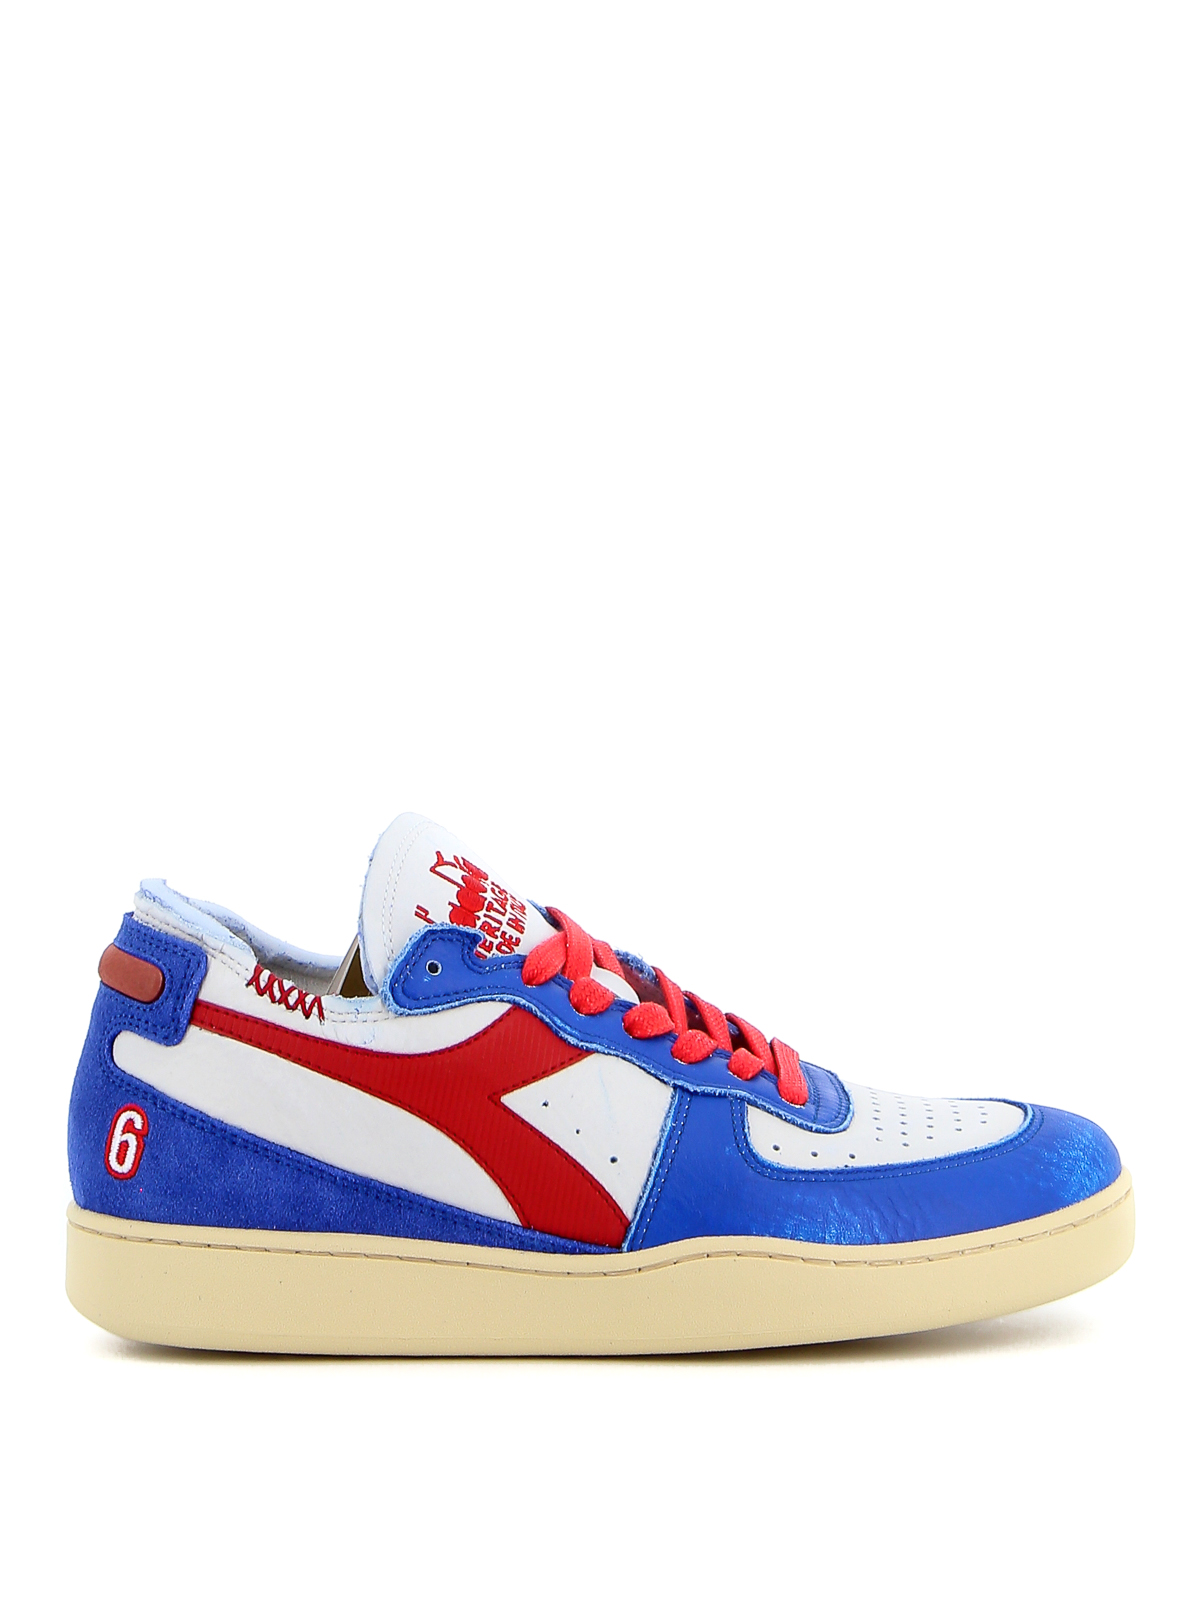 Trainers Diadora Heritage - Mi Basket Row Cut Philly 6 sneakers ...